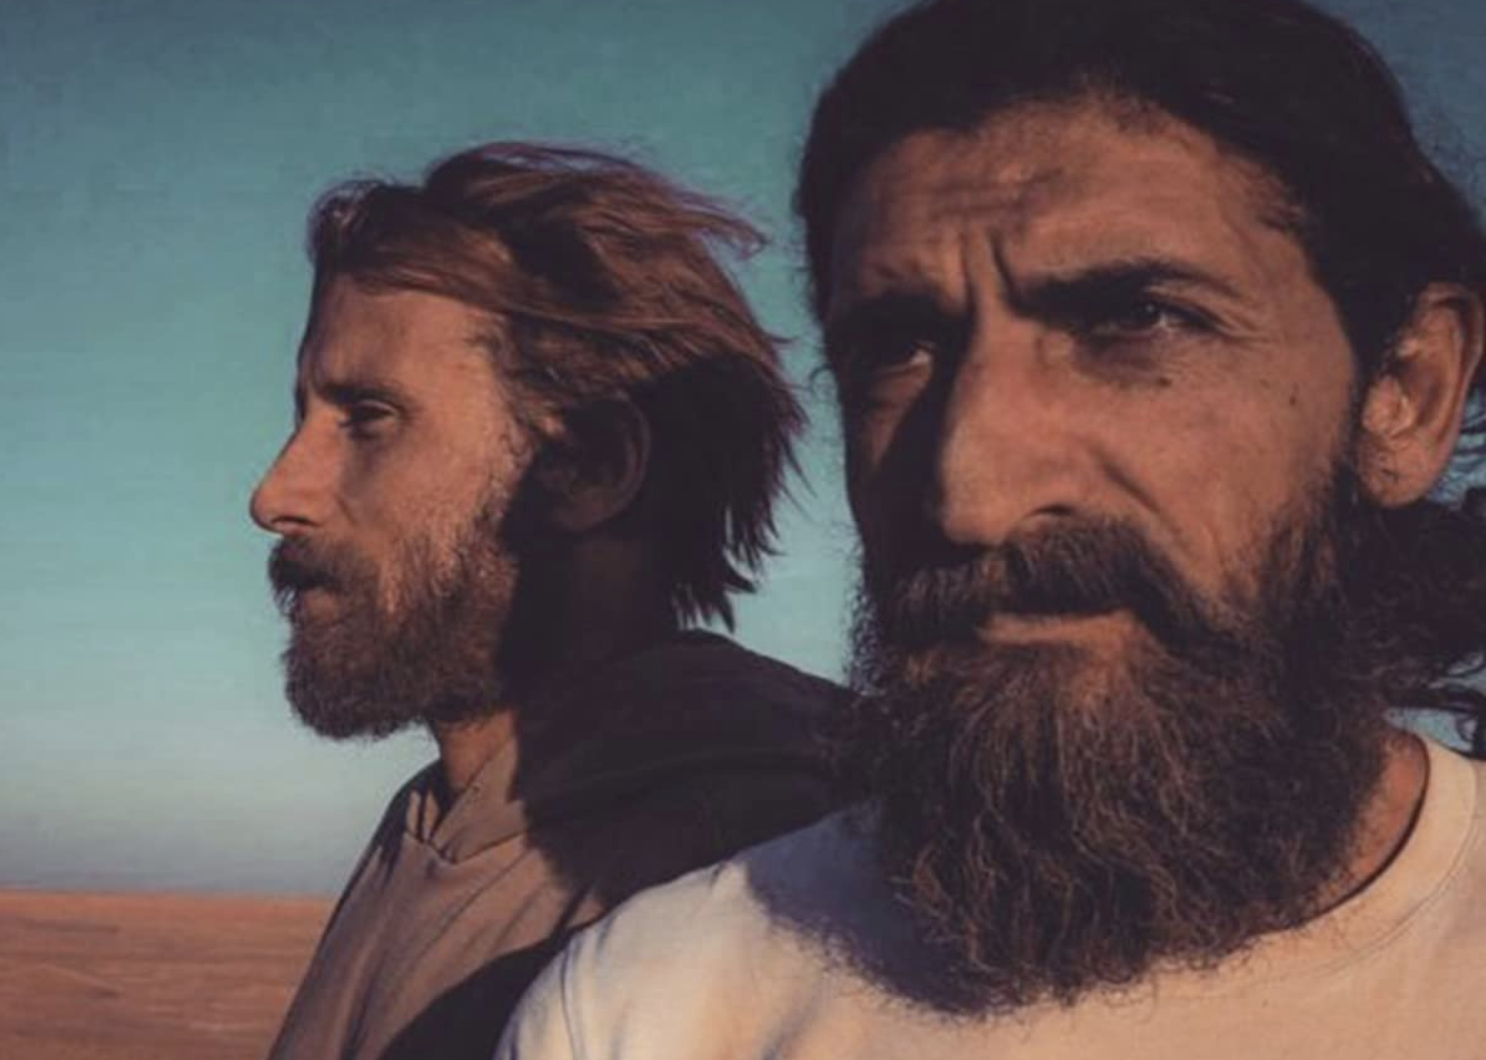 Matthias Schoenaerts and Numan Acar in "The Way of the Wind".